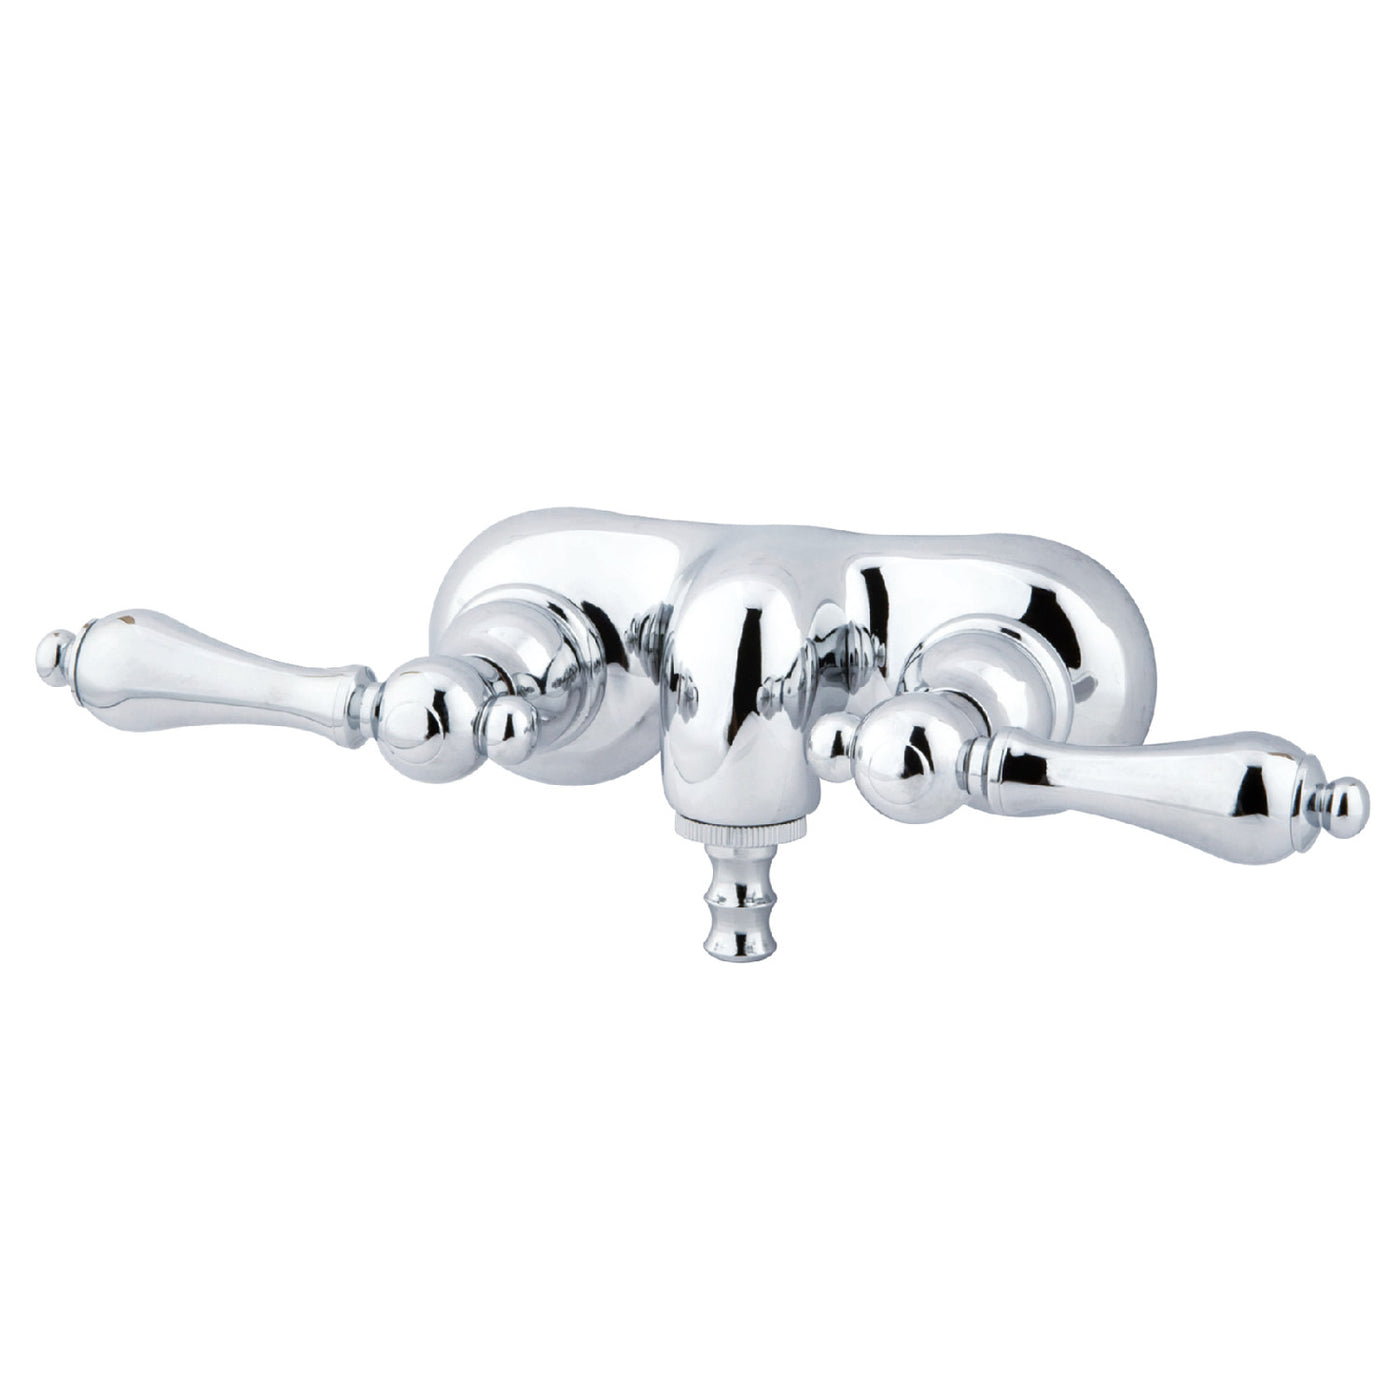 Elements of Design DT0421AL 3-3/8-Inch Wall Mount Tub Faucet, Polished Chrome